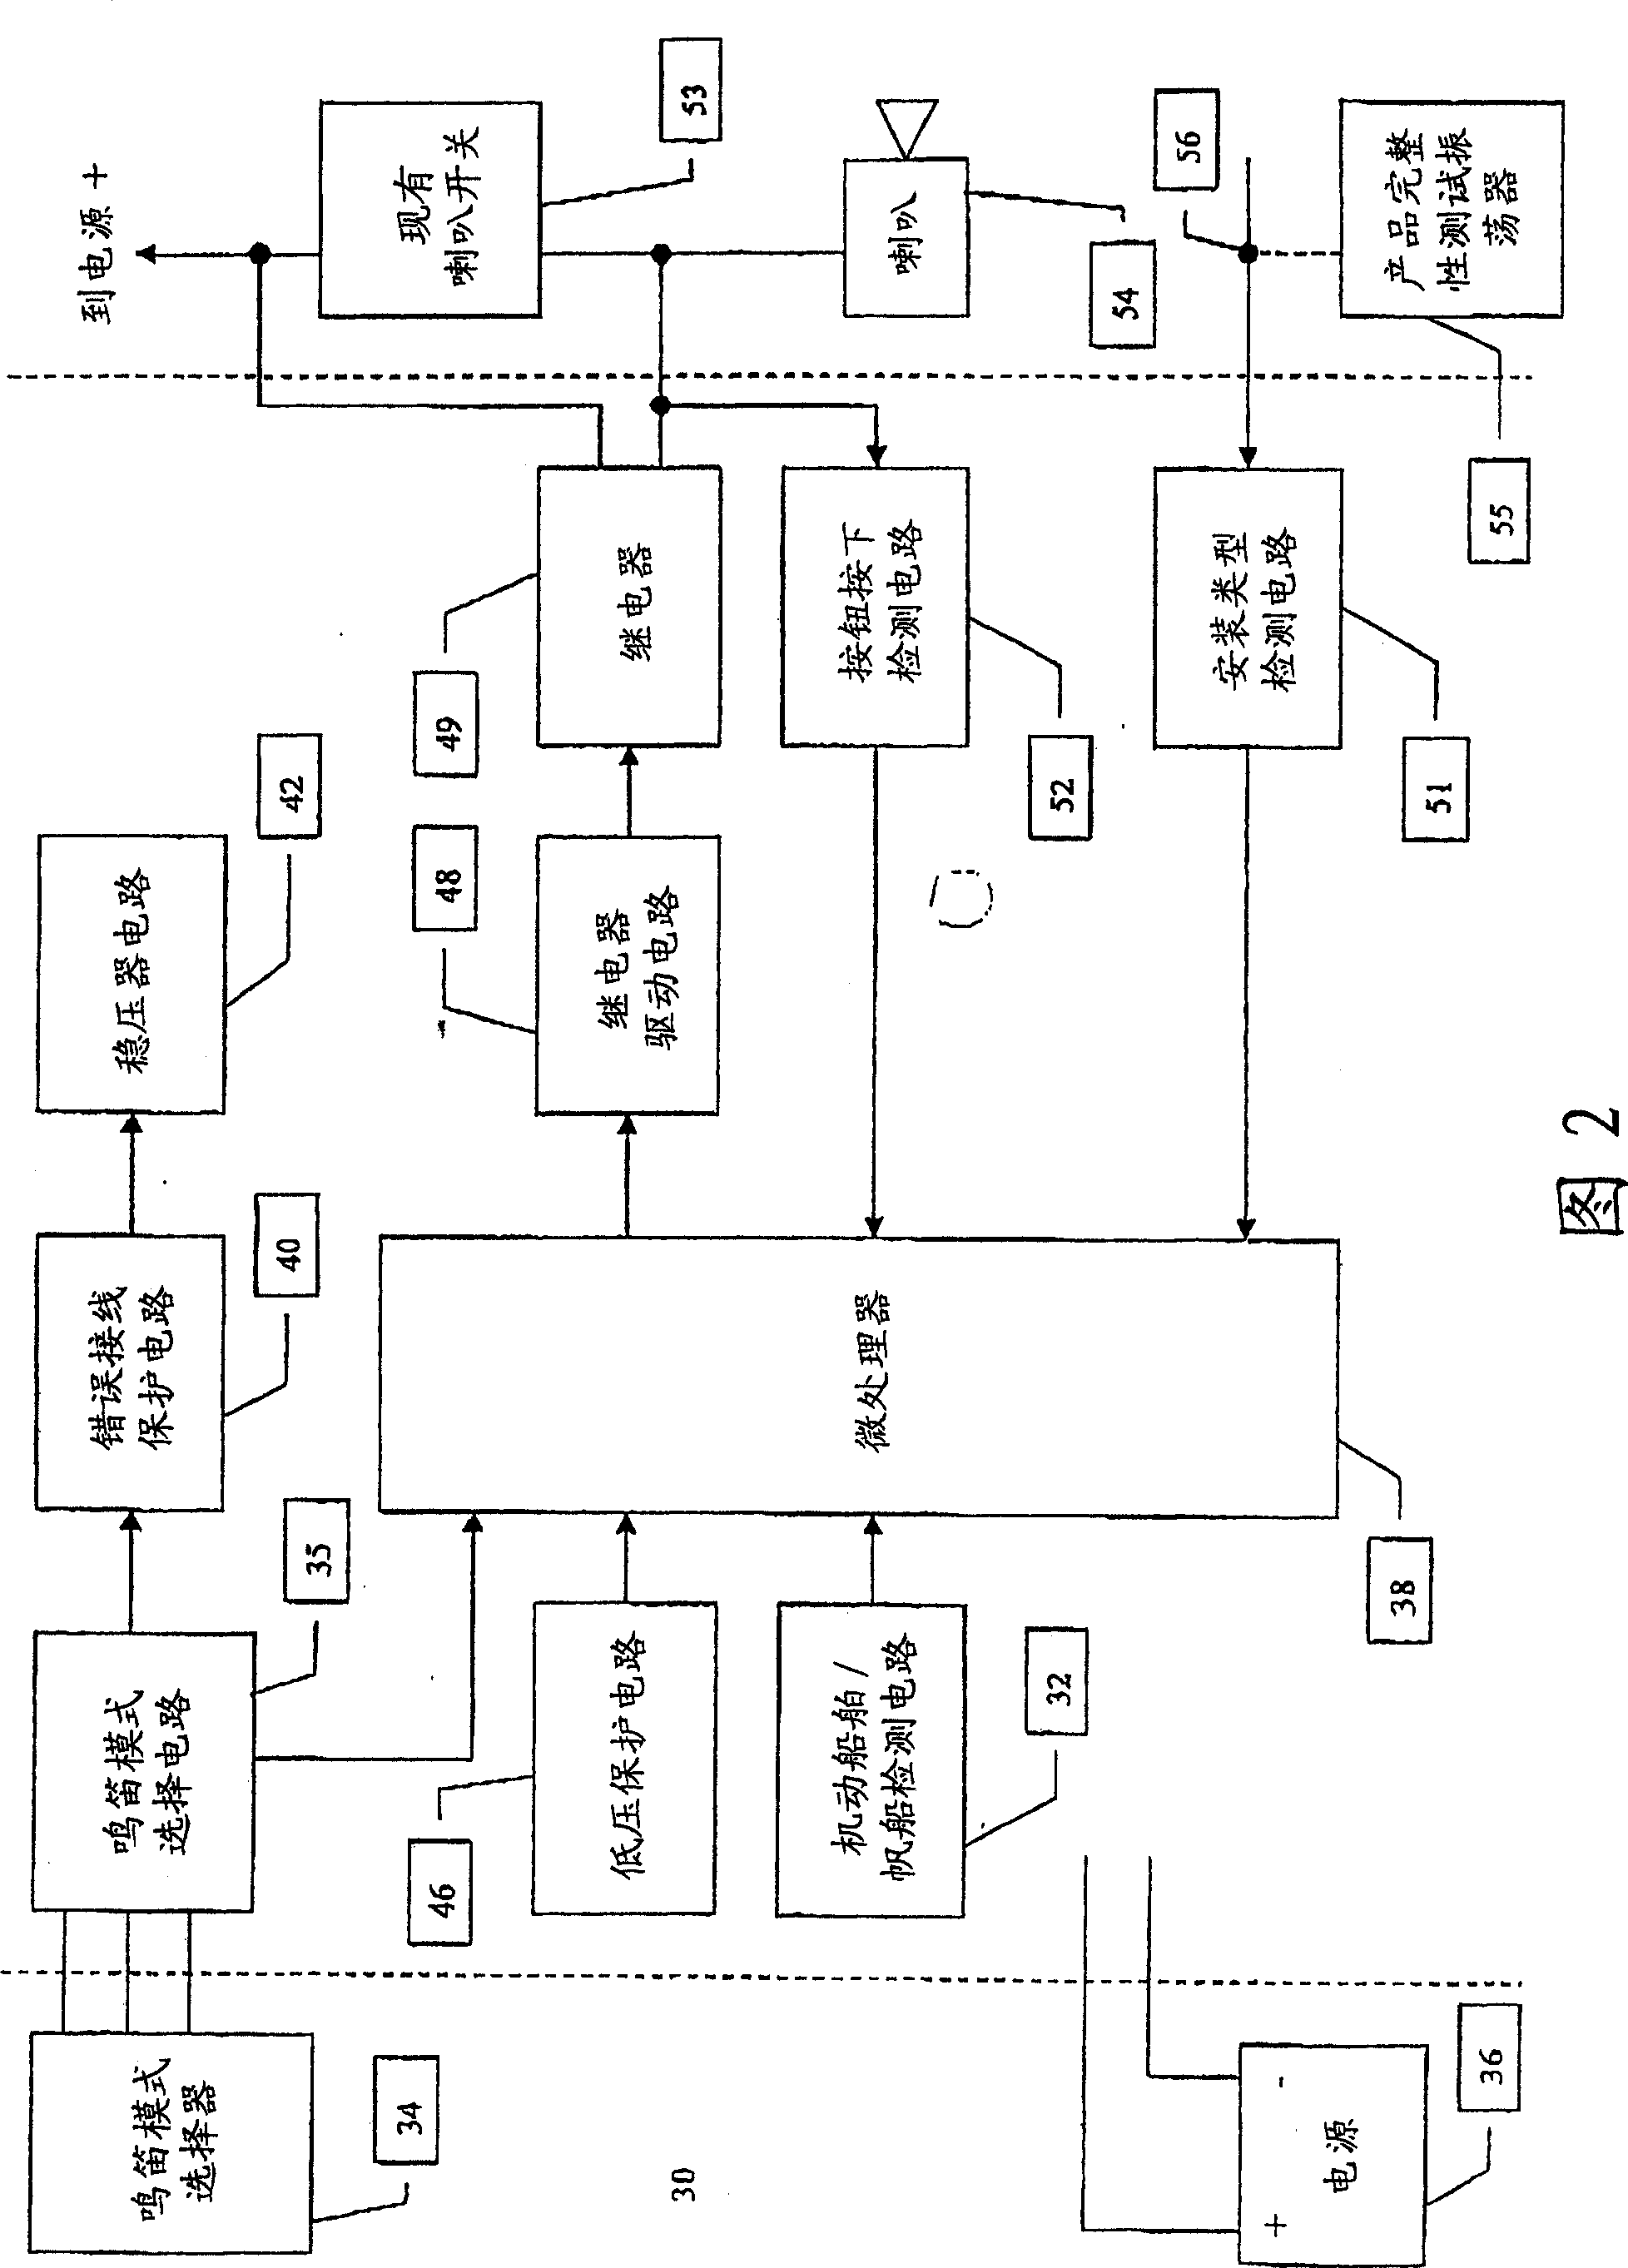 Controller for automatically manipulating a horn signal for navigational purposes